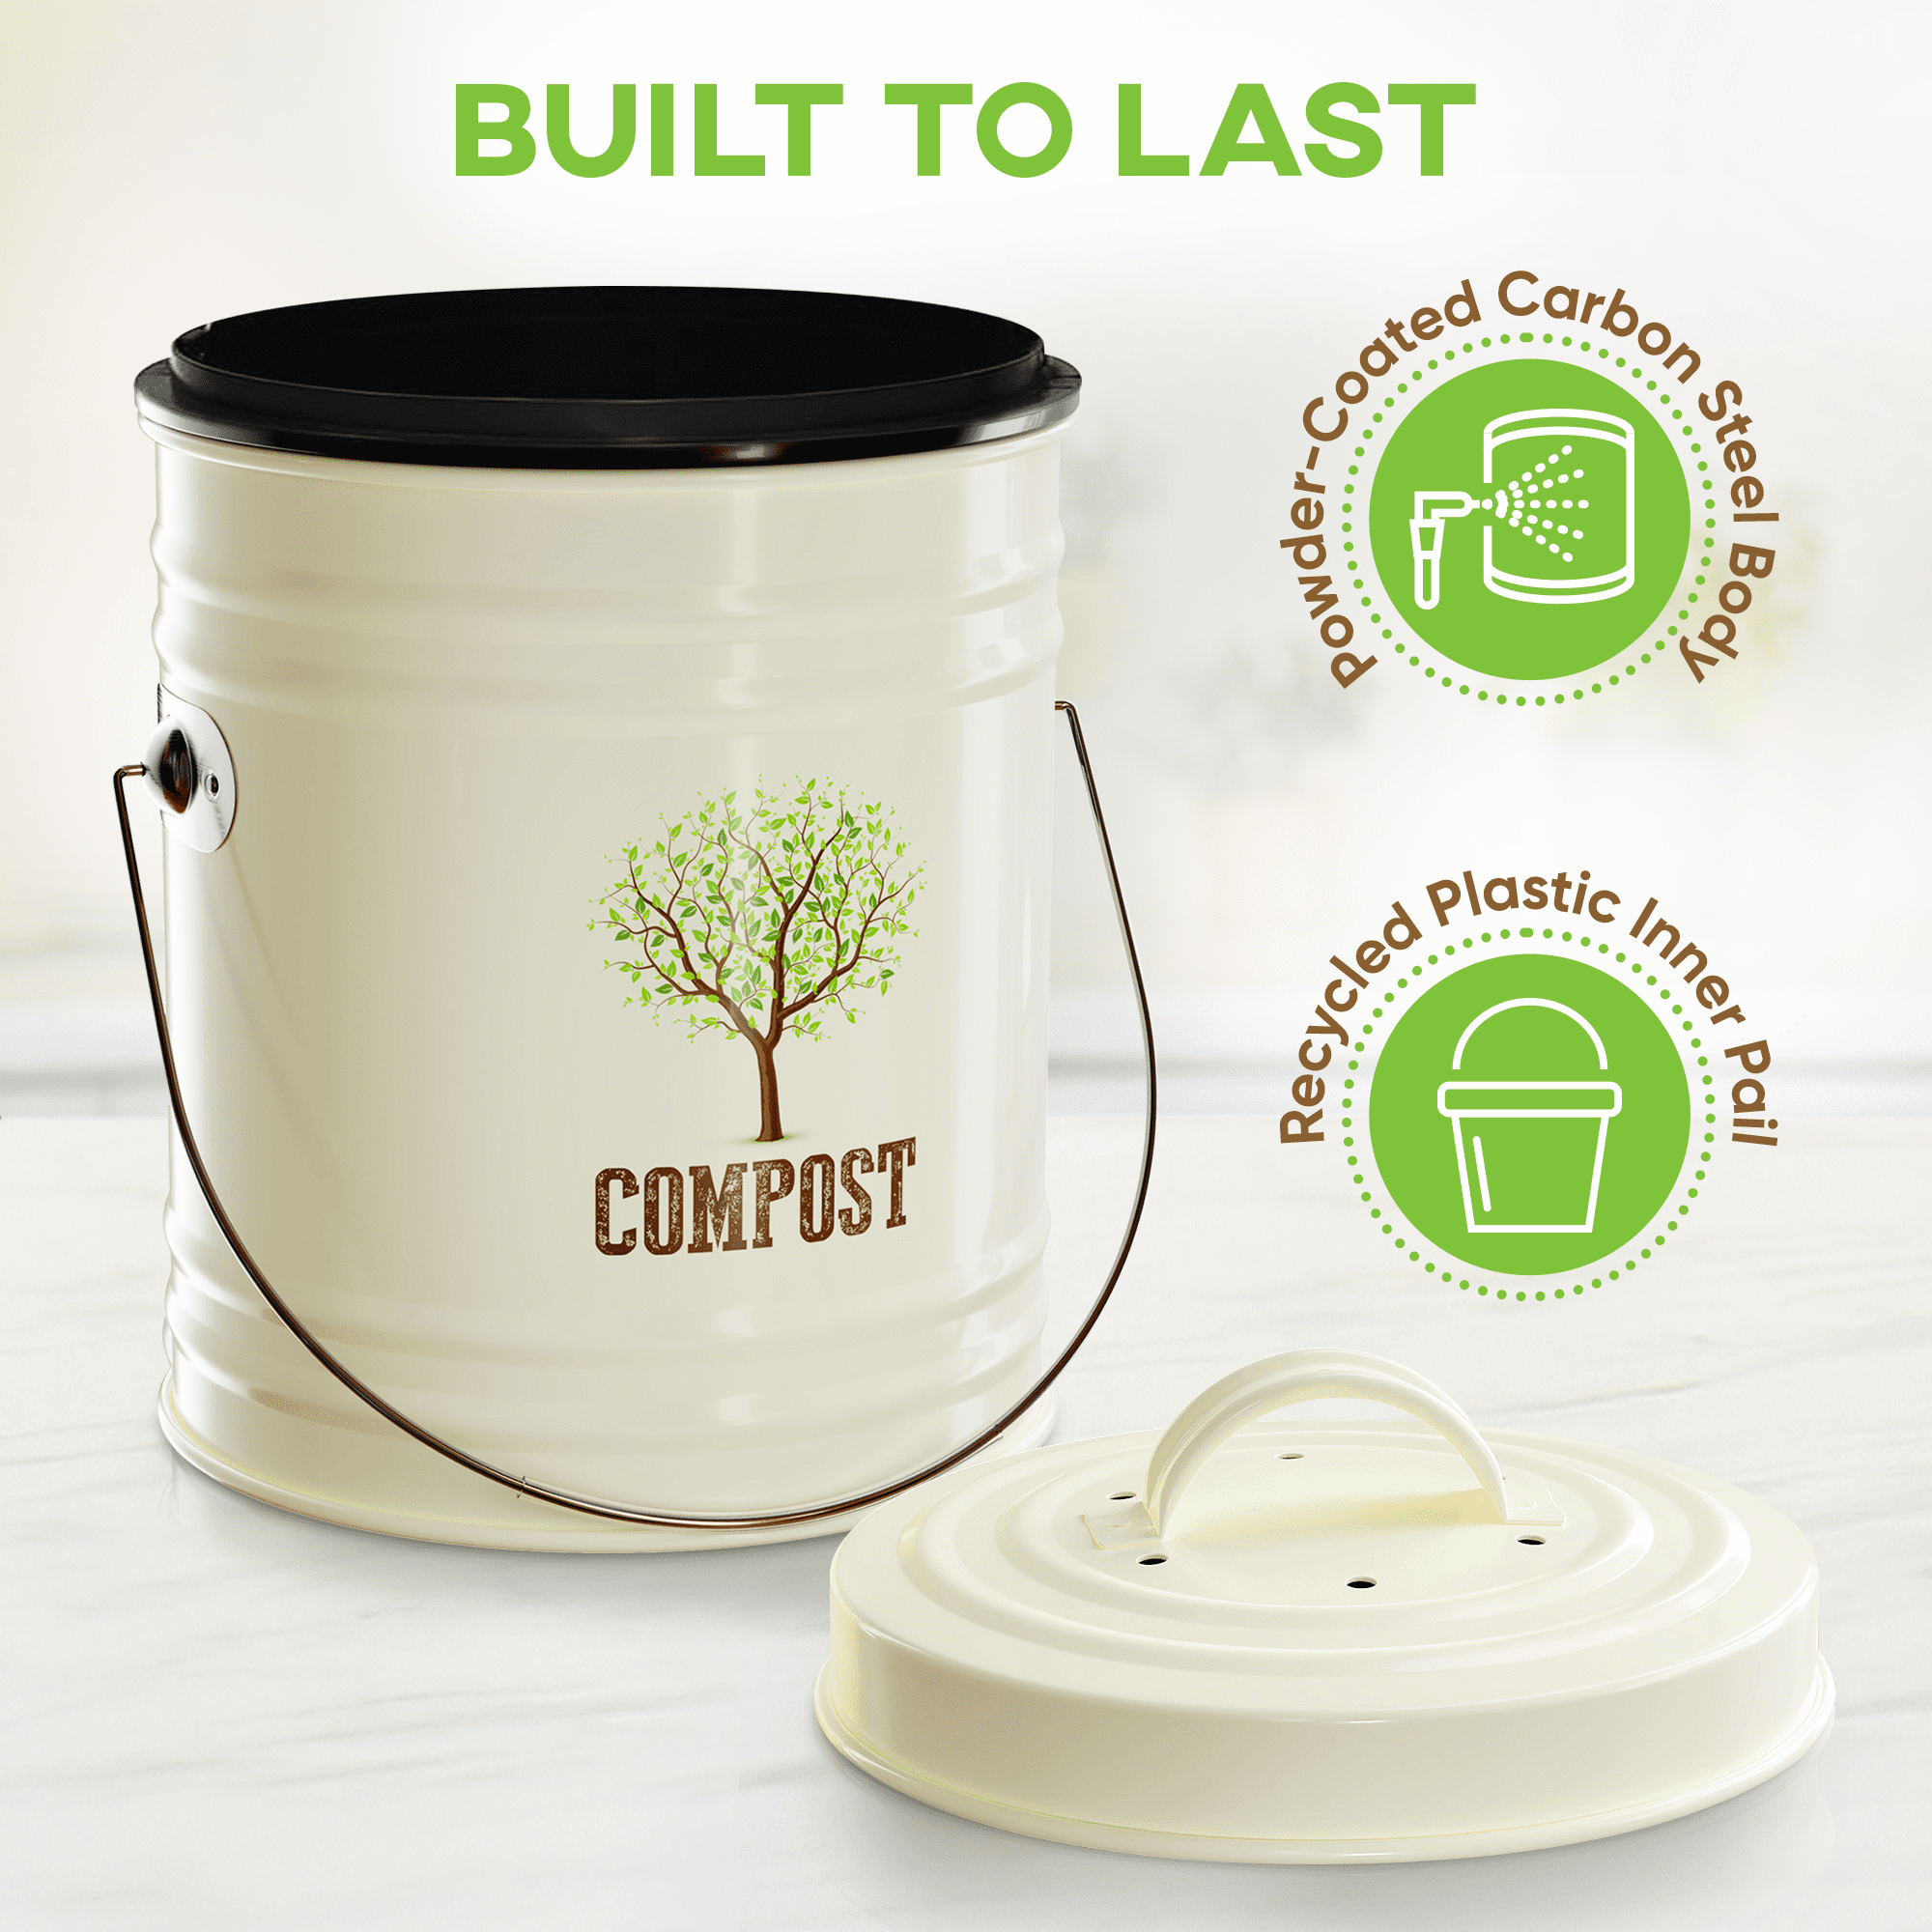 AOSION Kitchen Compost Bin Counter,1.0 Gallon Indoor Compost Bin with Lid,Compost Bucket Countertop Composter Container with 3pcs Charcoal Filters